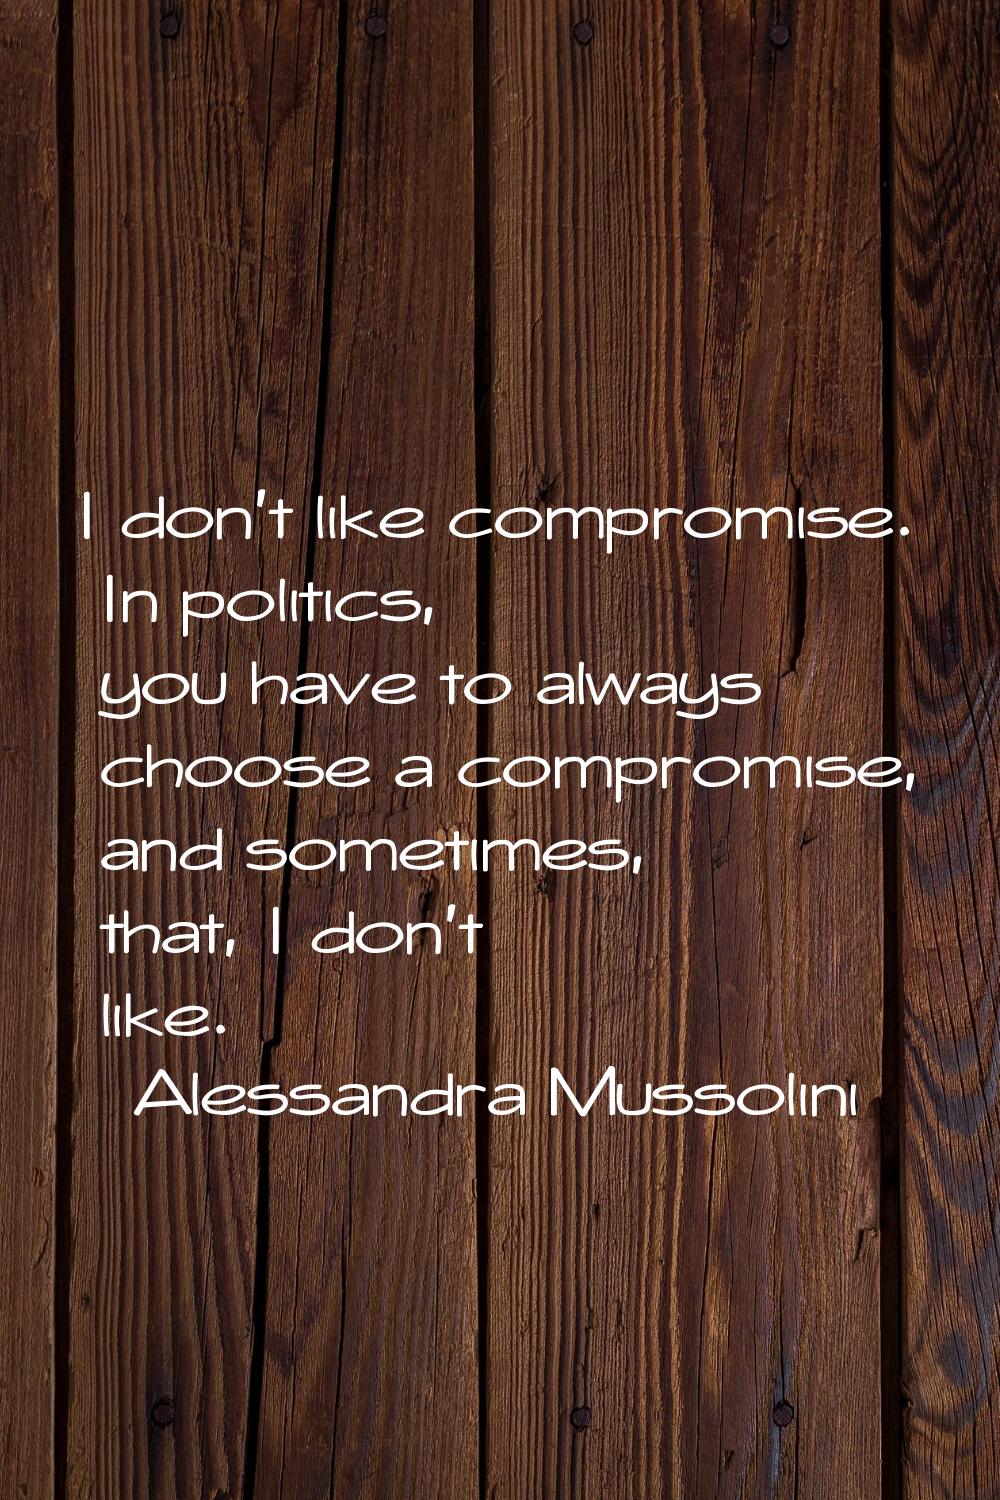 I don't like compromise. In politics, you have to always choose a compromise, and sometimes, that, 